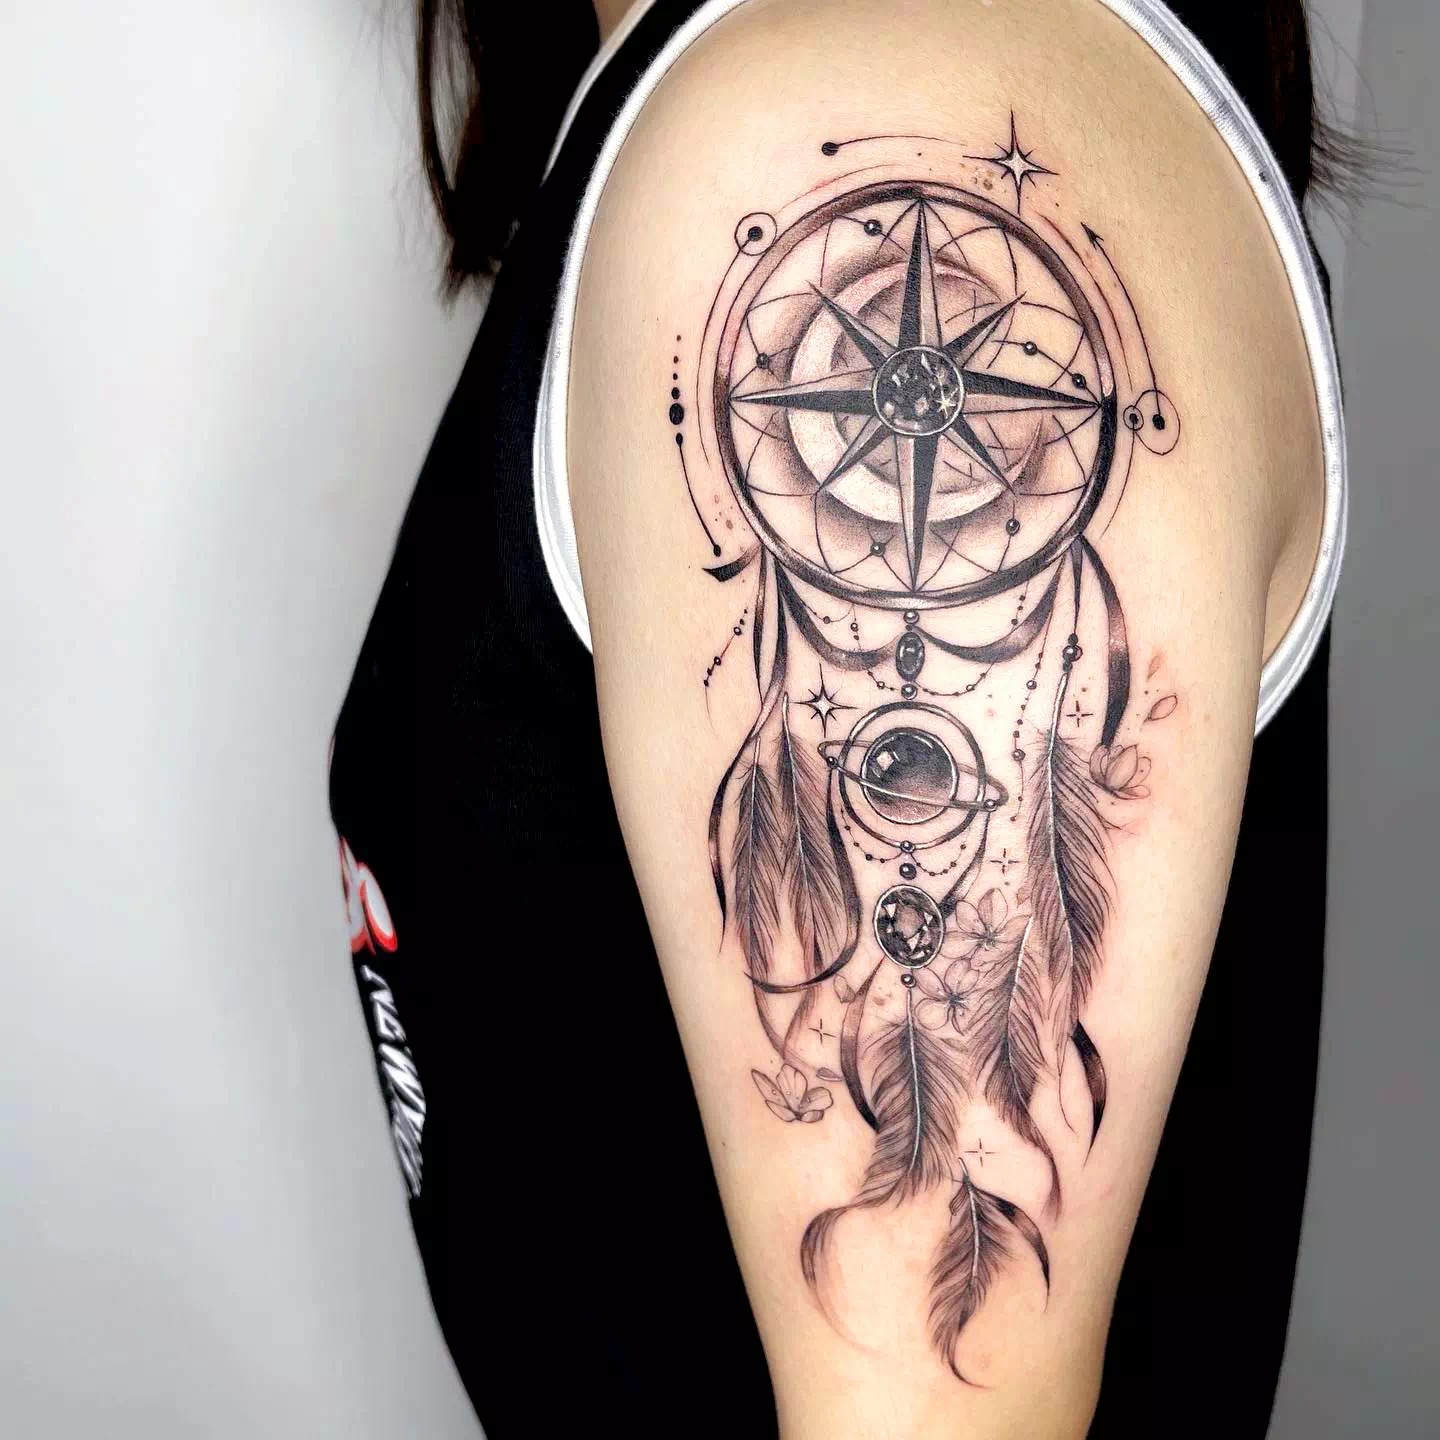 Compass Tattoo On Hand Shoulder